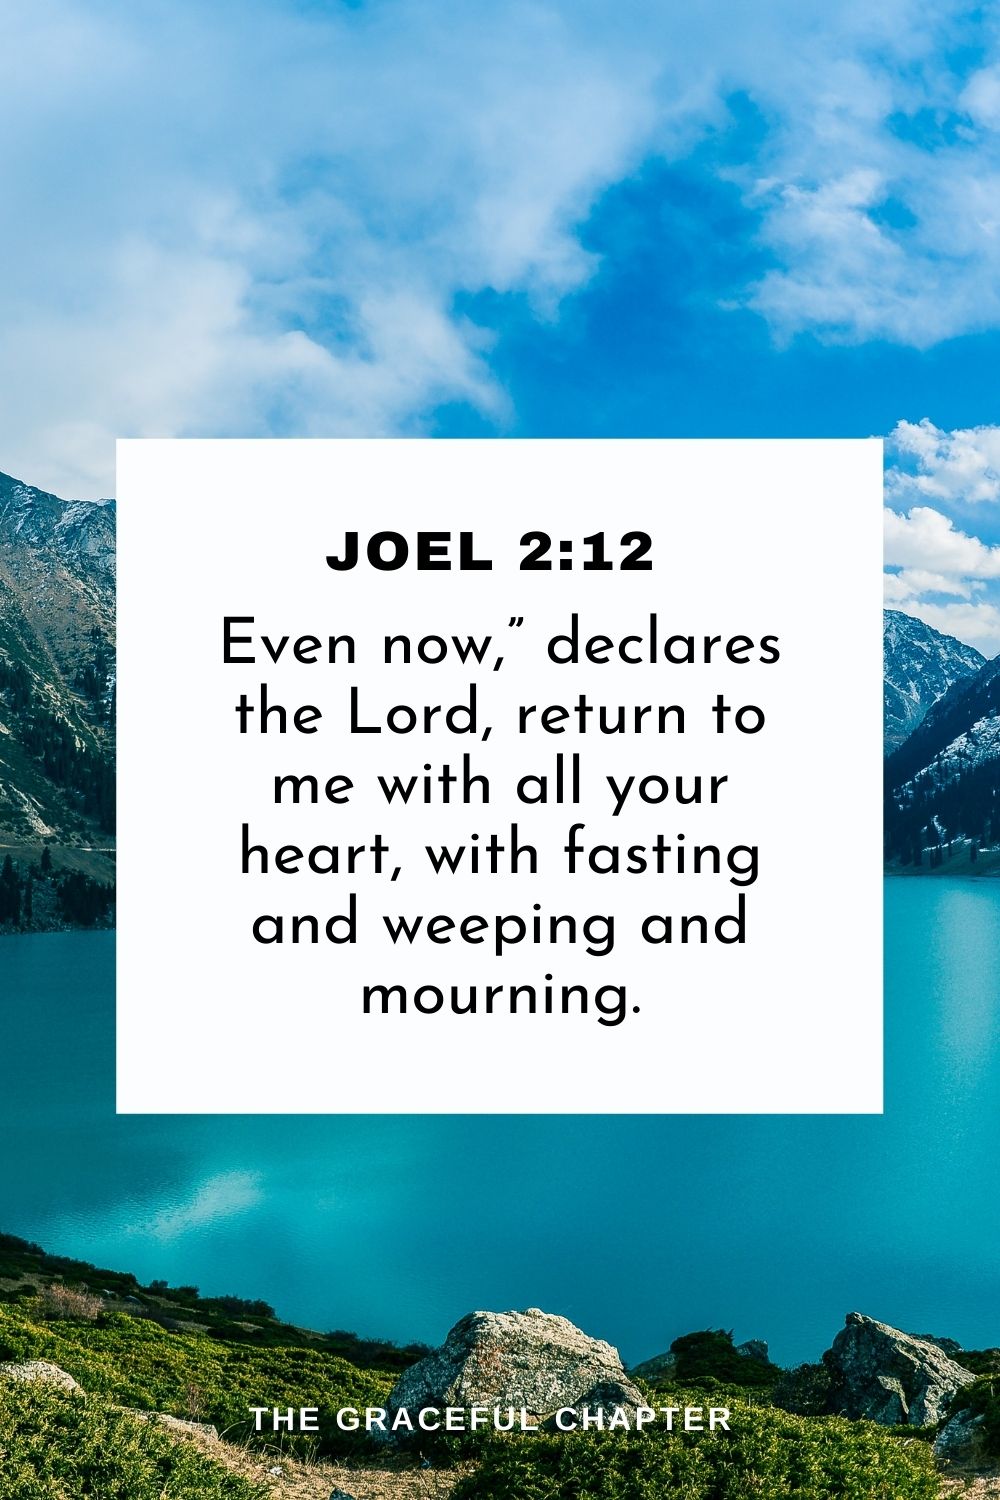 Even now,” declares the Lord, return to me with all your heart, with fasting and weeping and mourning. Joel 2:12